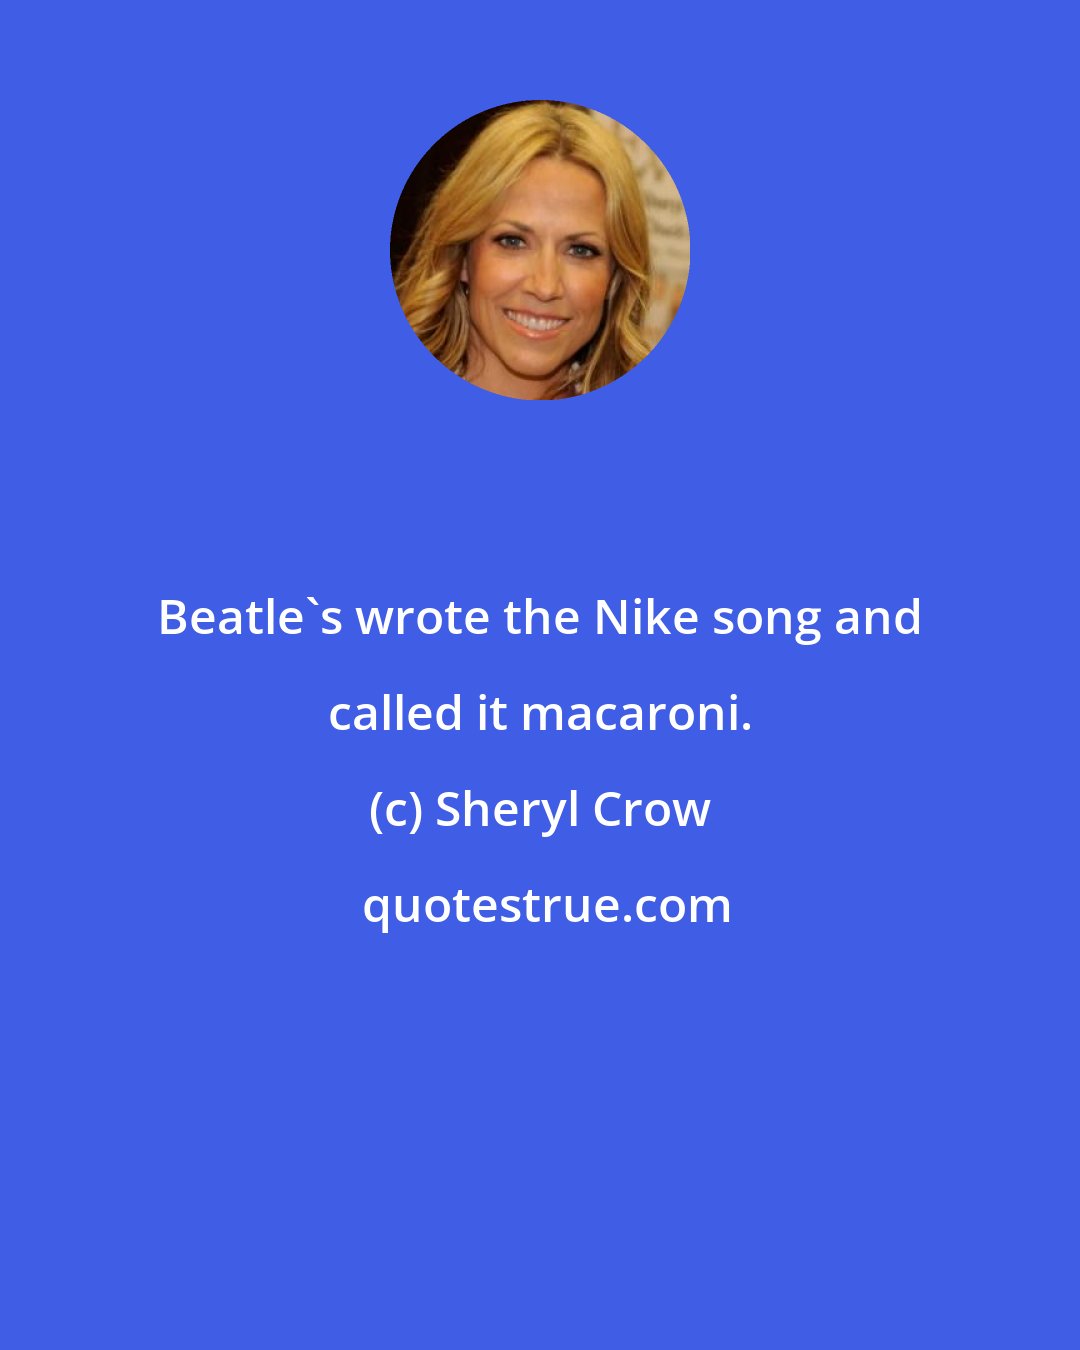 Sheryl Crow: Beatle's wrote the Nike song and called it macaroni.